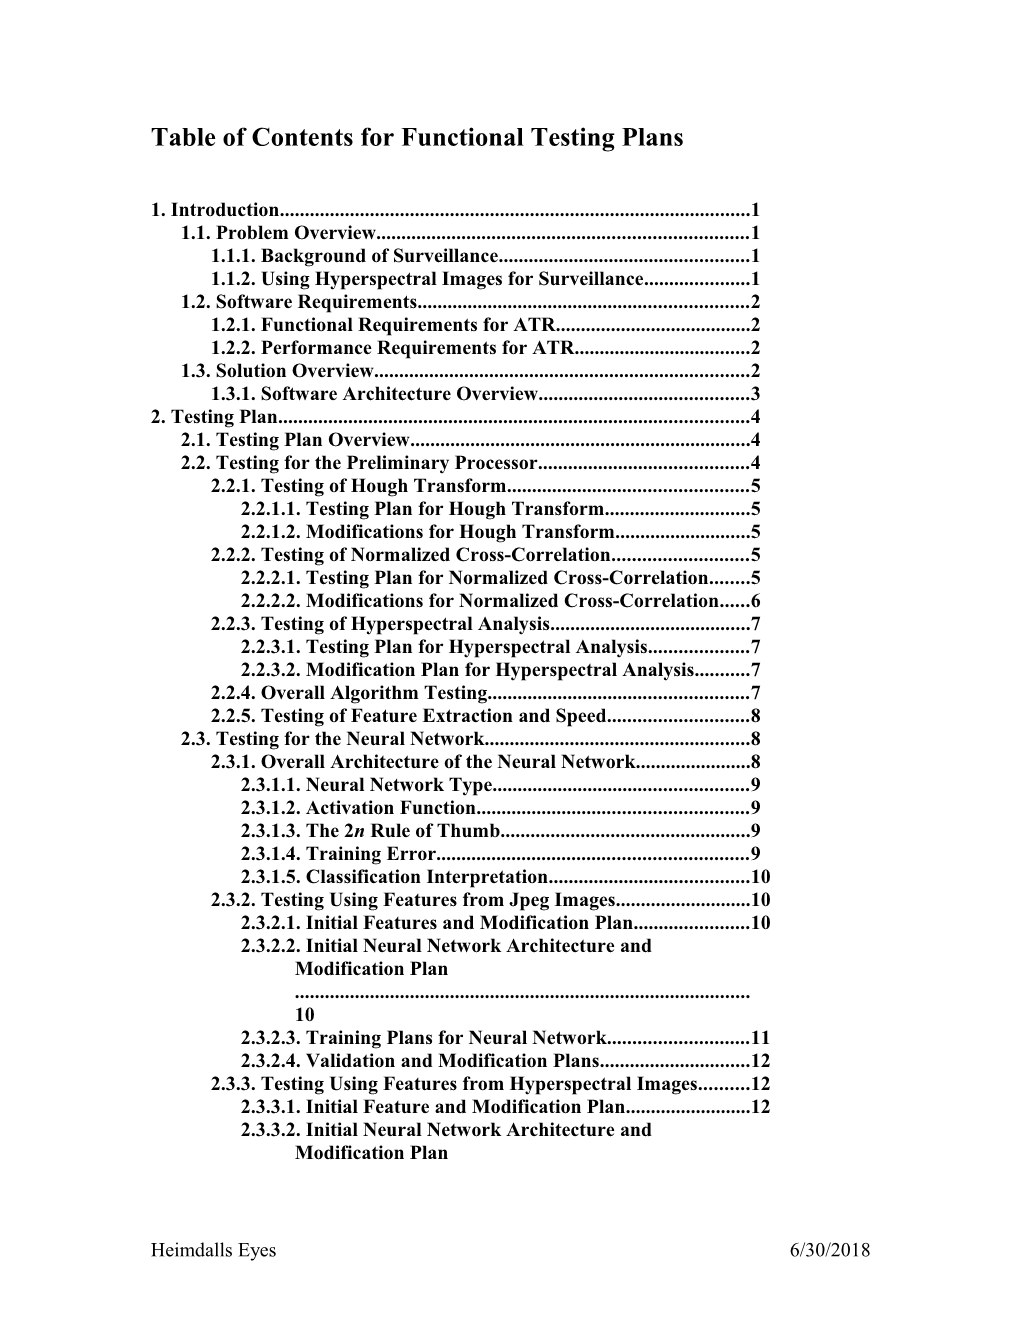 Table of Contents for Functional Testing Plans